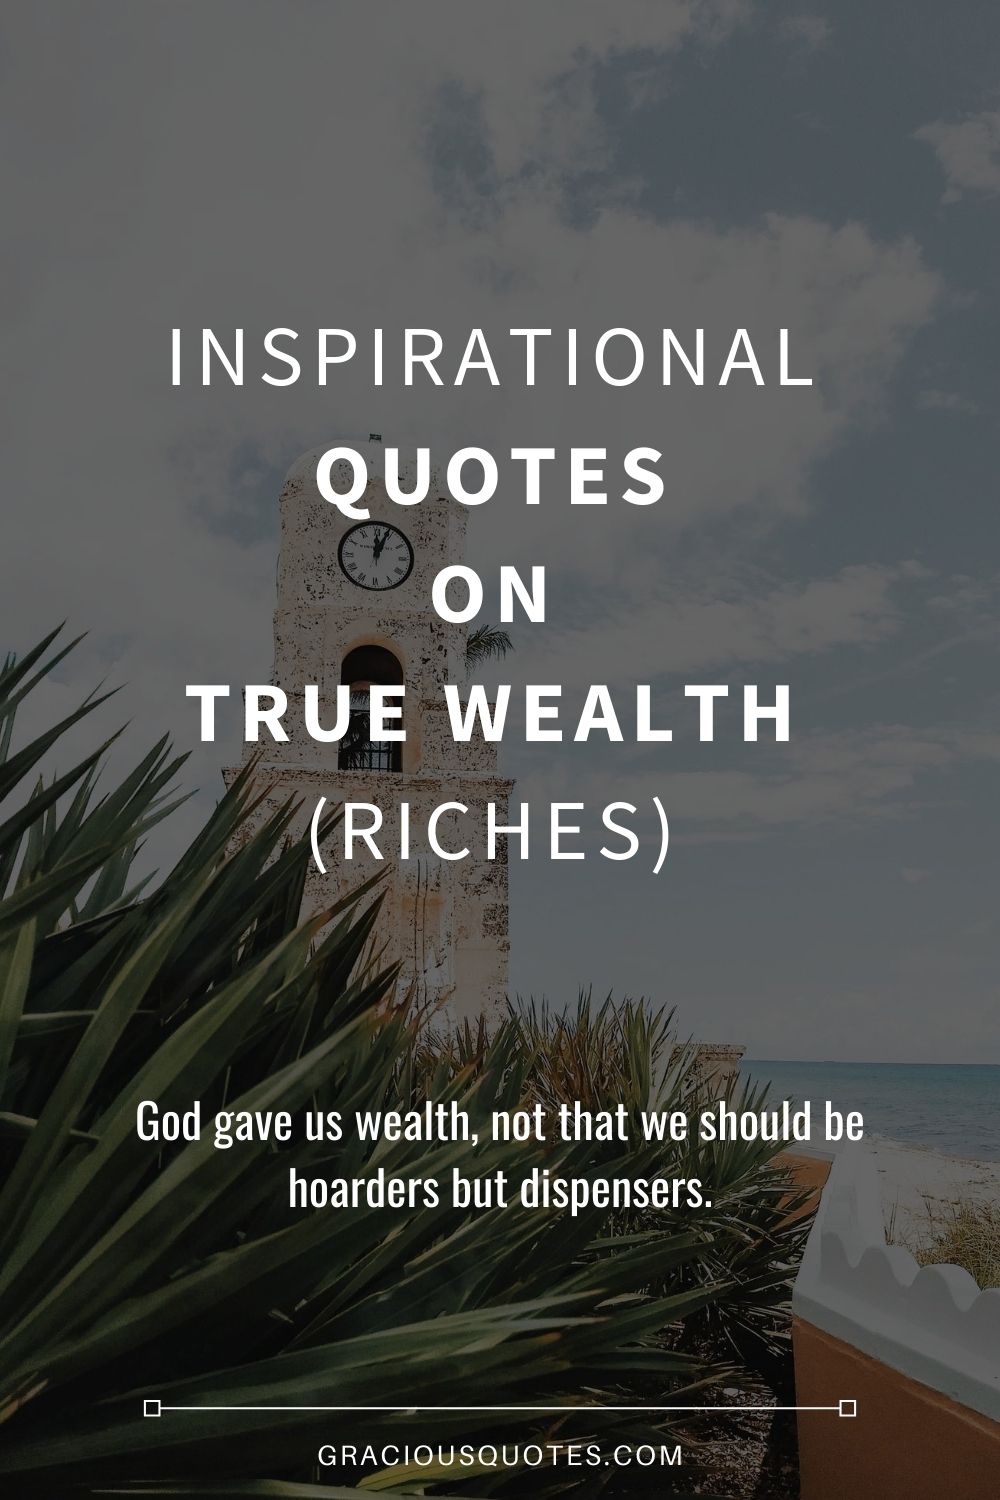 Inspirational Quotes on True Wealth (RICHES) - Gracious Quotes